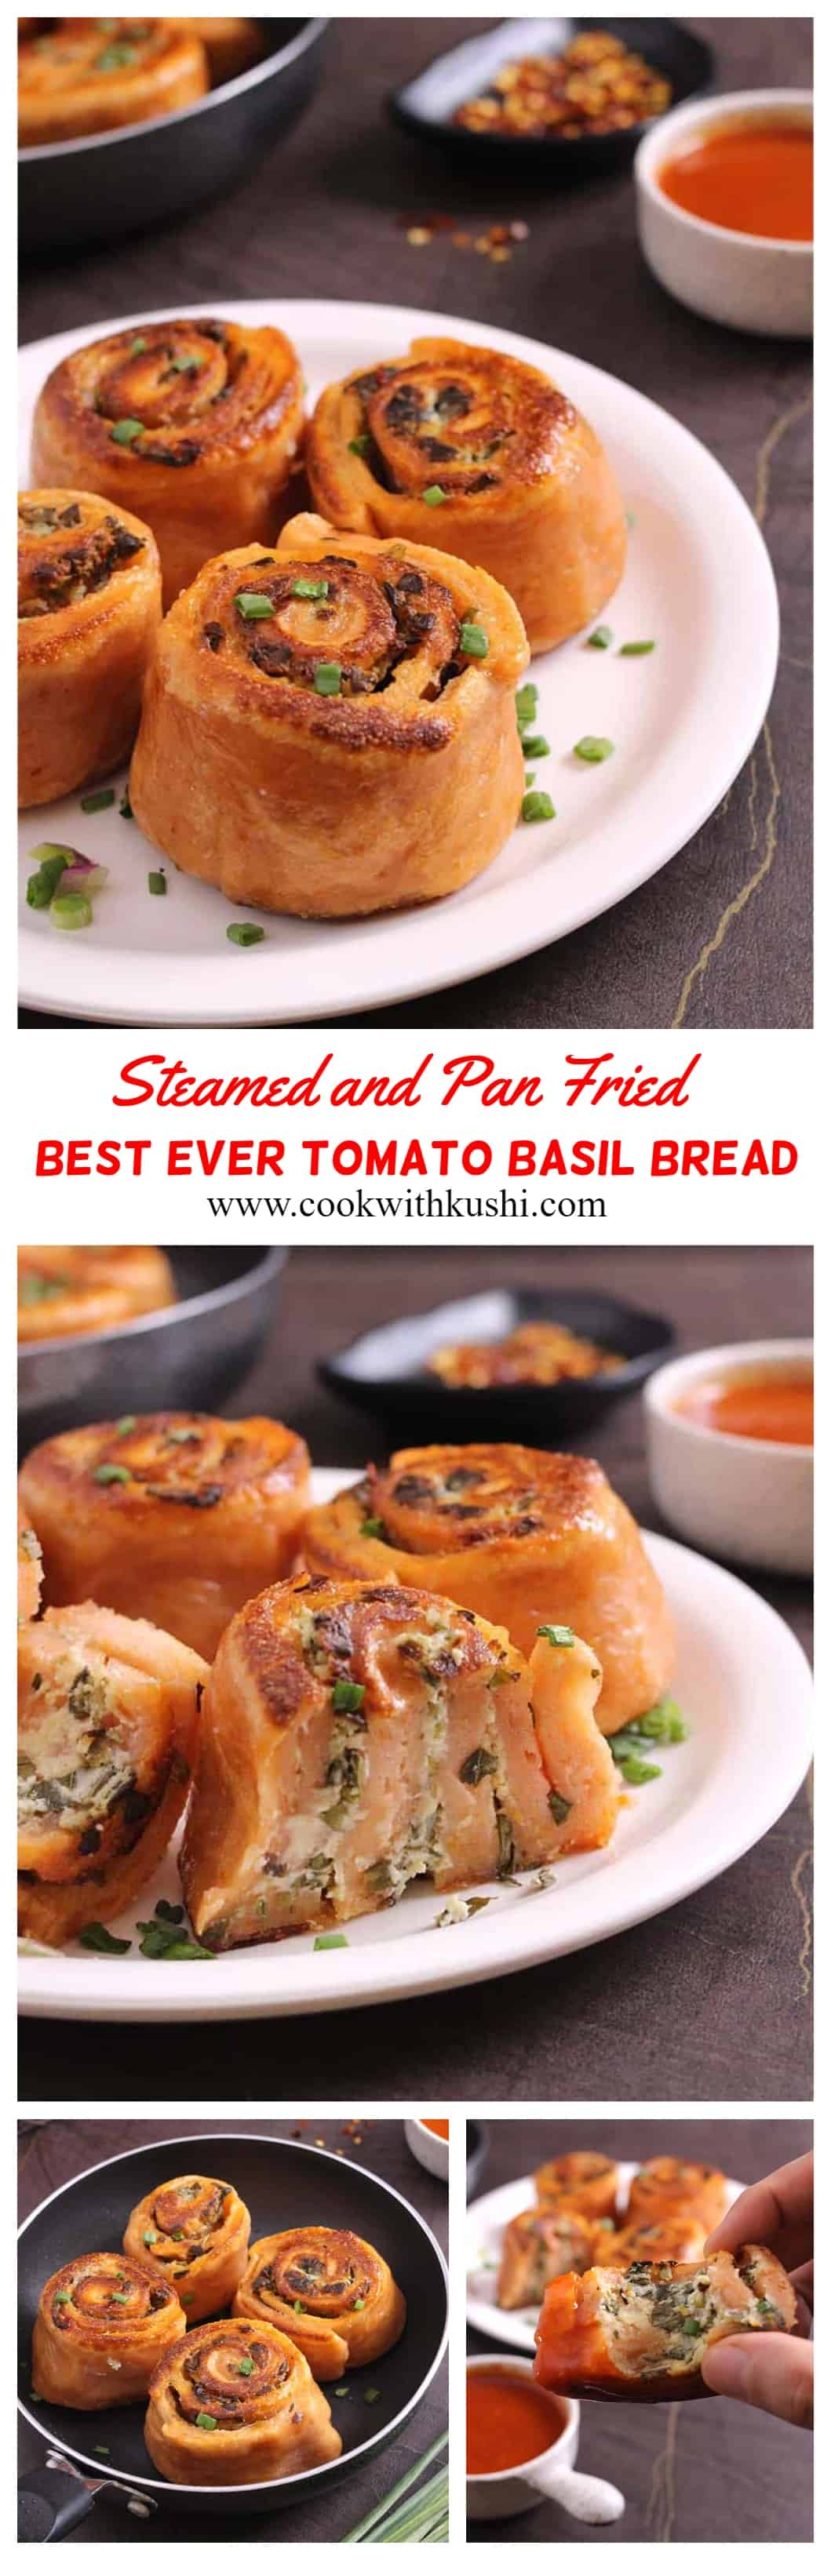 This Tomato Basil Bread is soft and delicious with crunchy exterior and flavorful filling where the dough is prepared using fresh tomatoes and stuffed with fresh basil leaves, cream cheese and spring onions (scallions). You will only be craving for more after your first bite!!#panerabread #steamedbuns #Panfried #baobuns #tomatobasil #creamcheese #tomatoes #summerrecipes #thanksgivingrecipes #christmasrecipes, #dinnersides #sidedish #vegan #vegetarian 